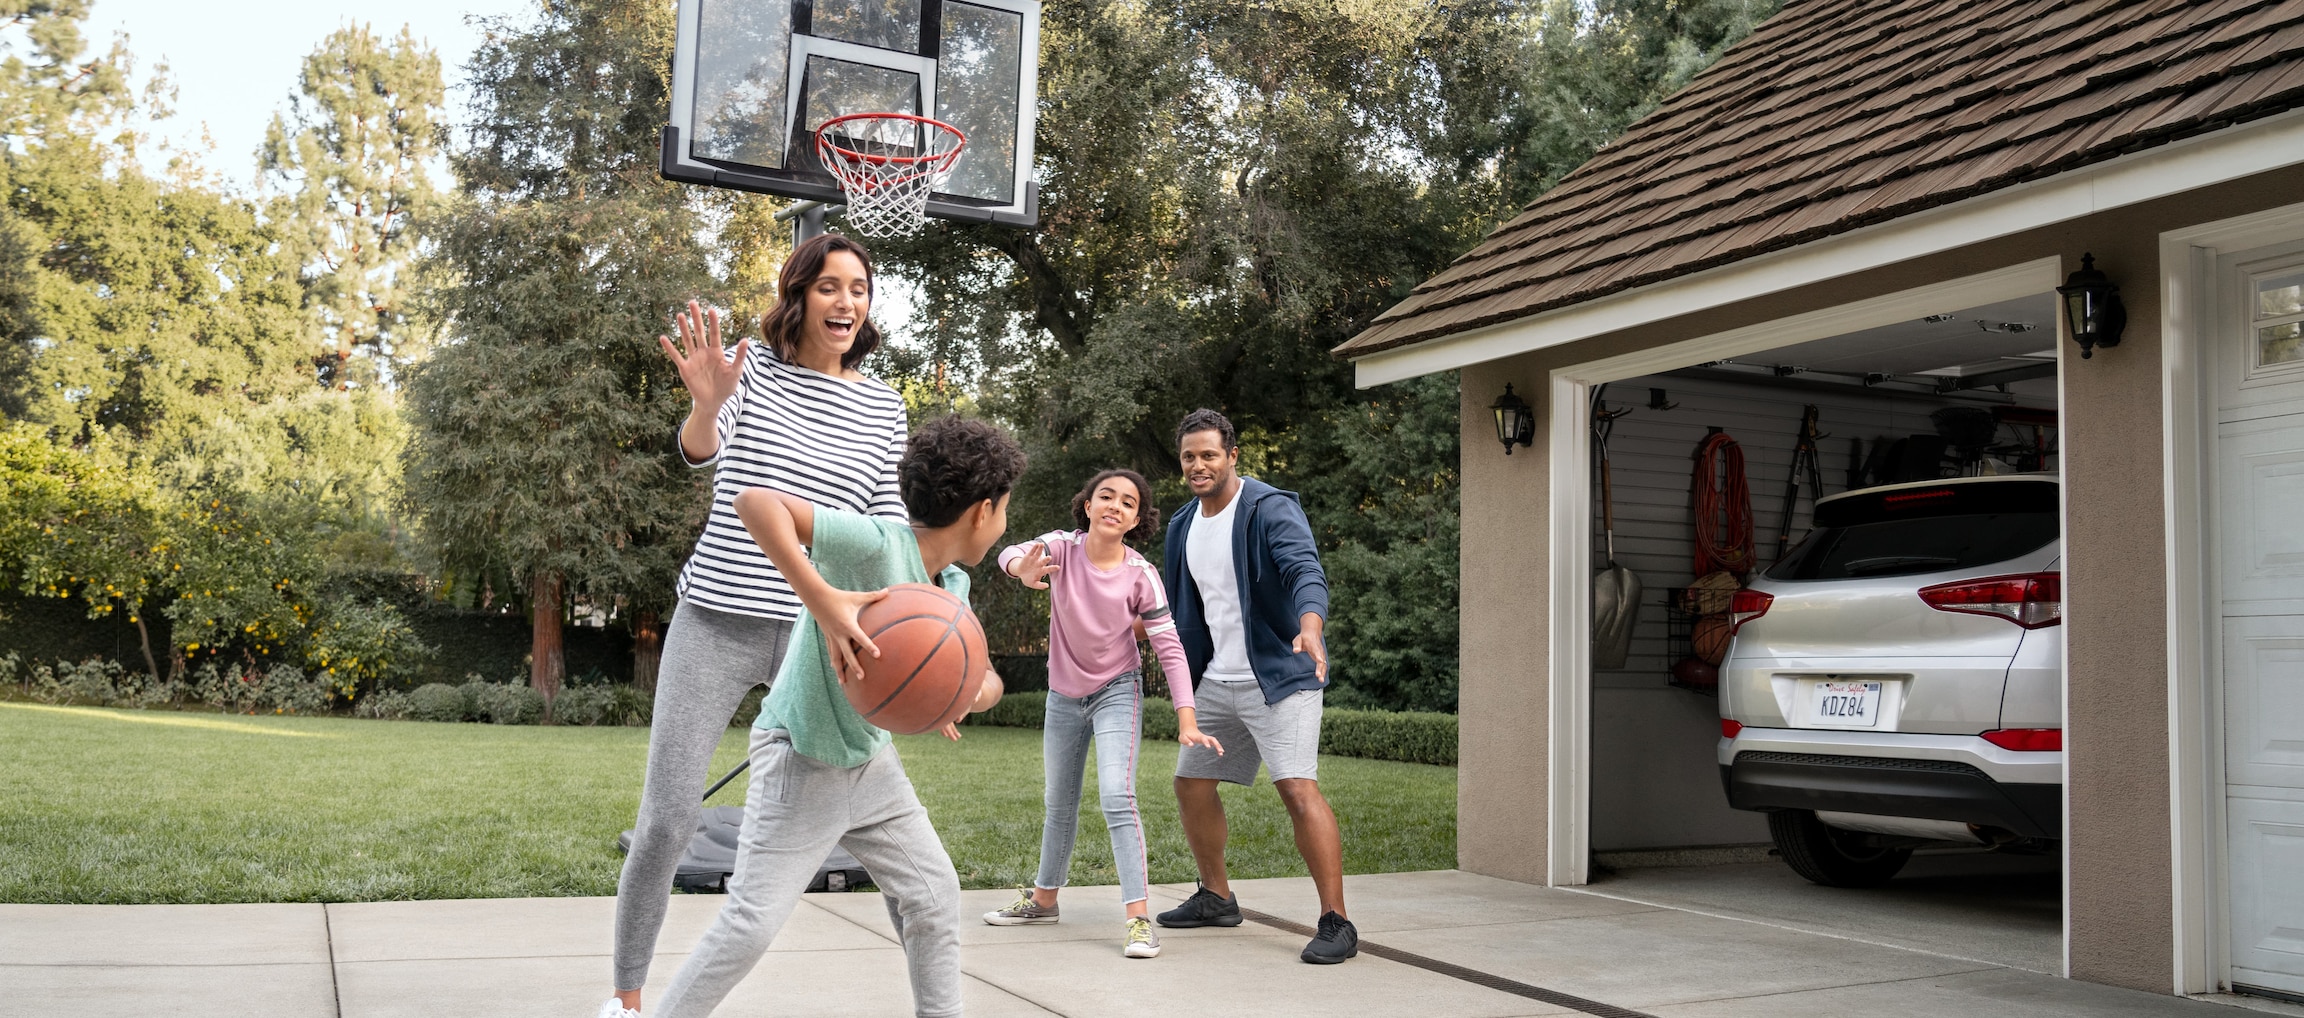 Family playing some basketball in their driveway